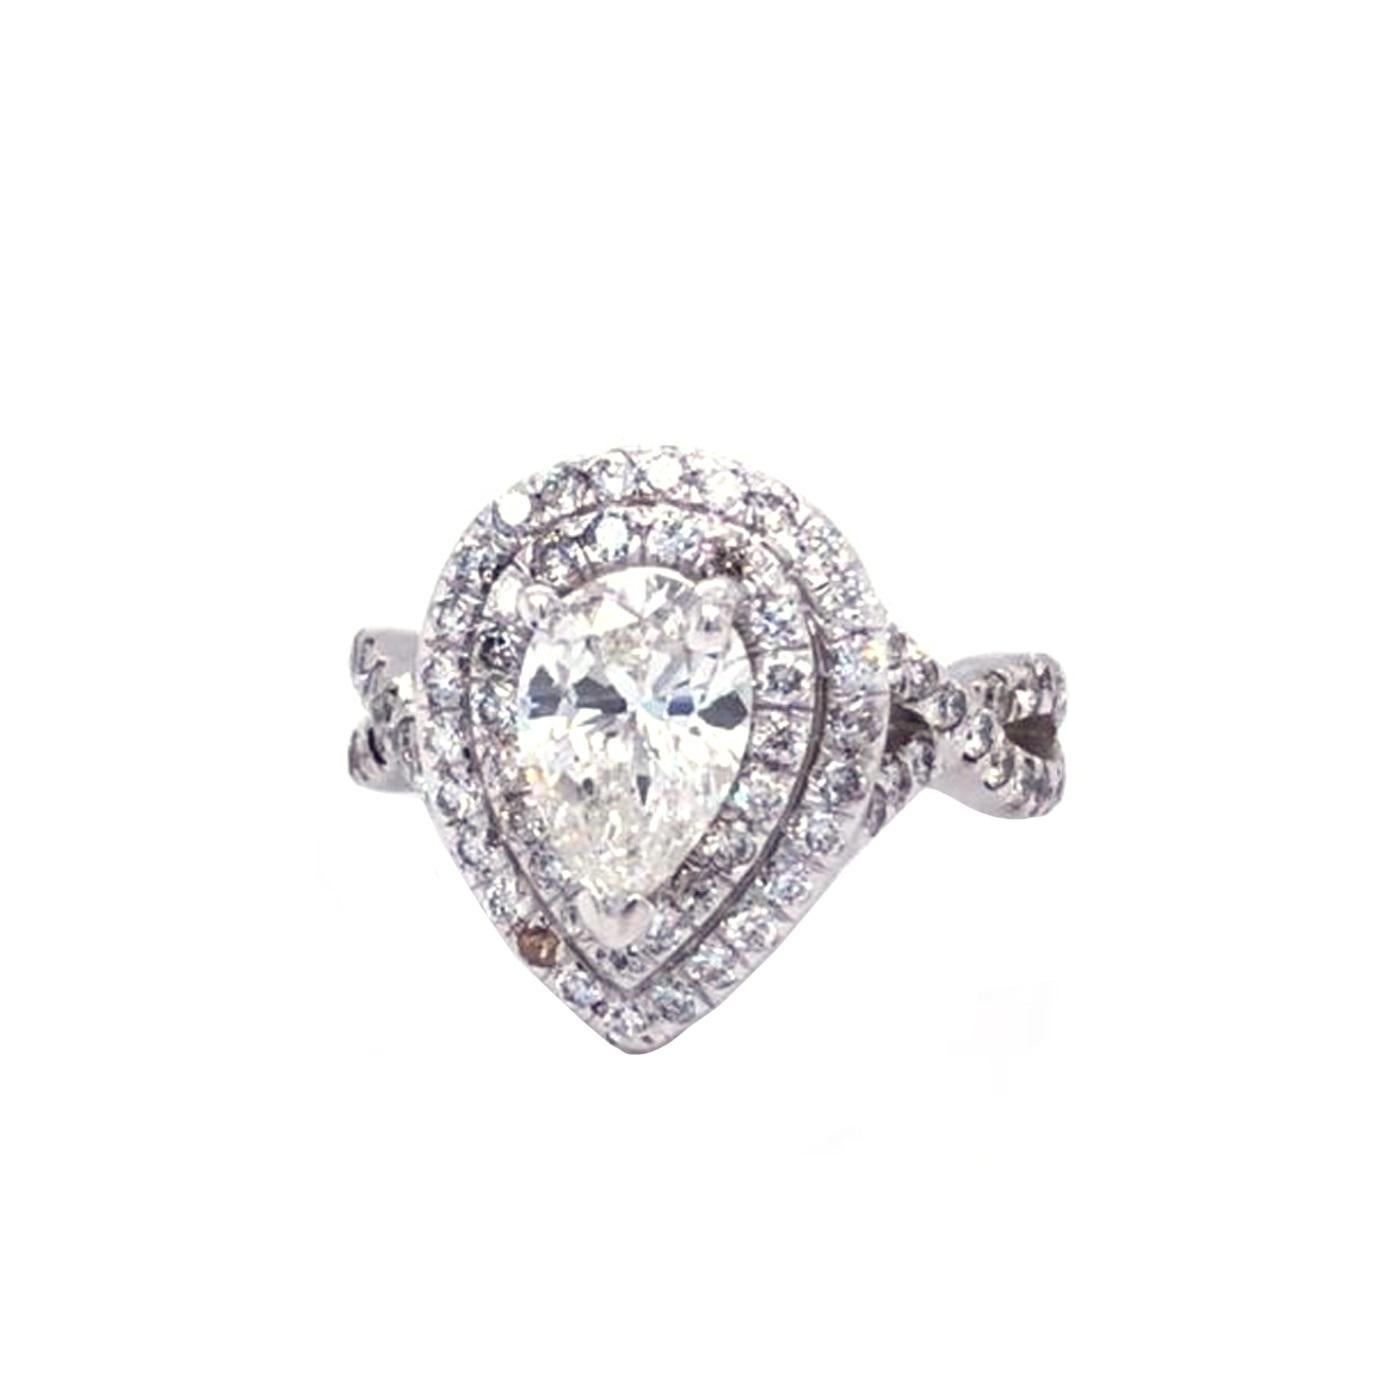 Classic Diamond ring, Sparkling, Pear brilliant-cut natural 1.28-carat center diamond encased with 3 prongs, accented round brilliant cut diamonds on the shoulder and two rows framing the center diamond, Beautiful handcrafted design set in high